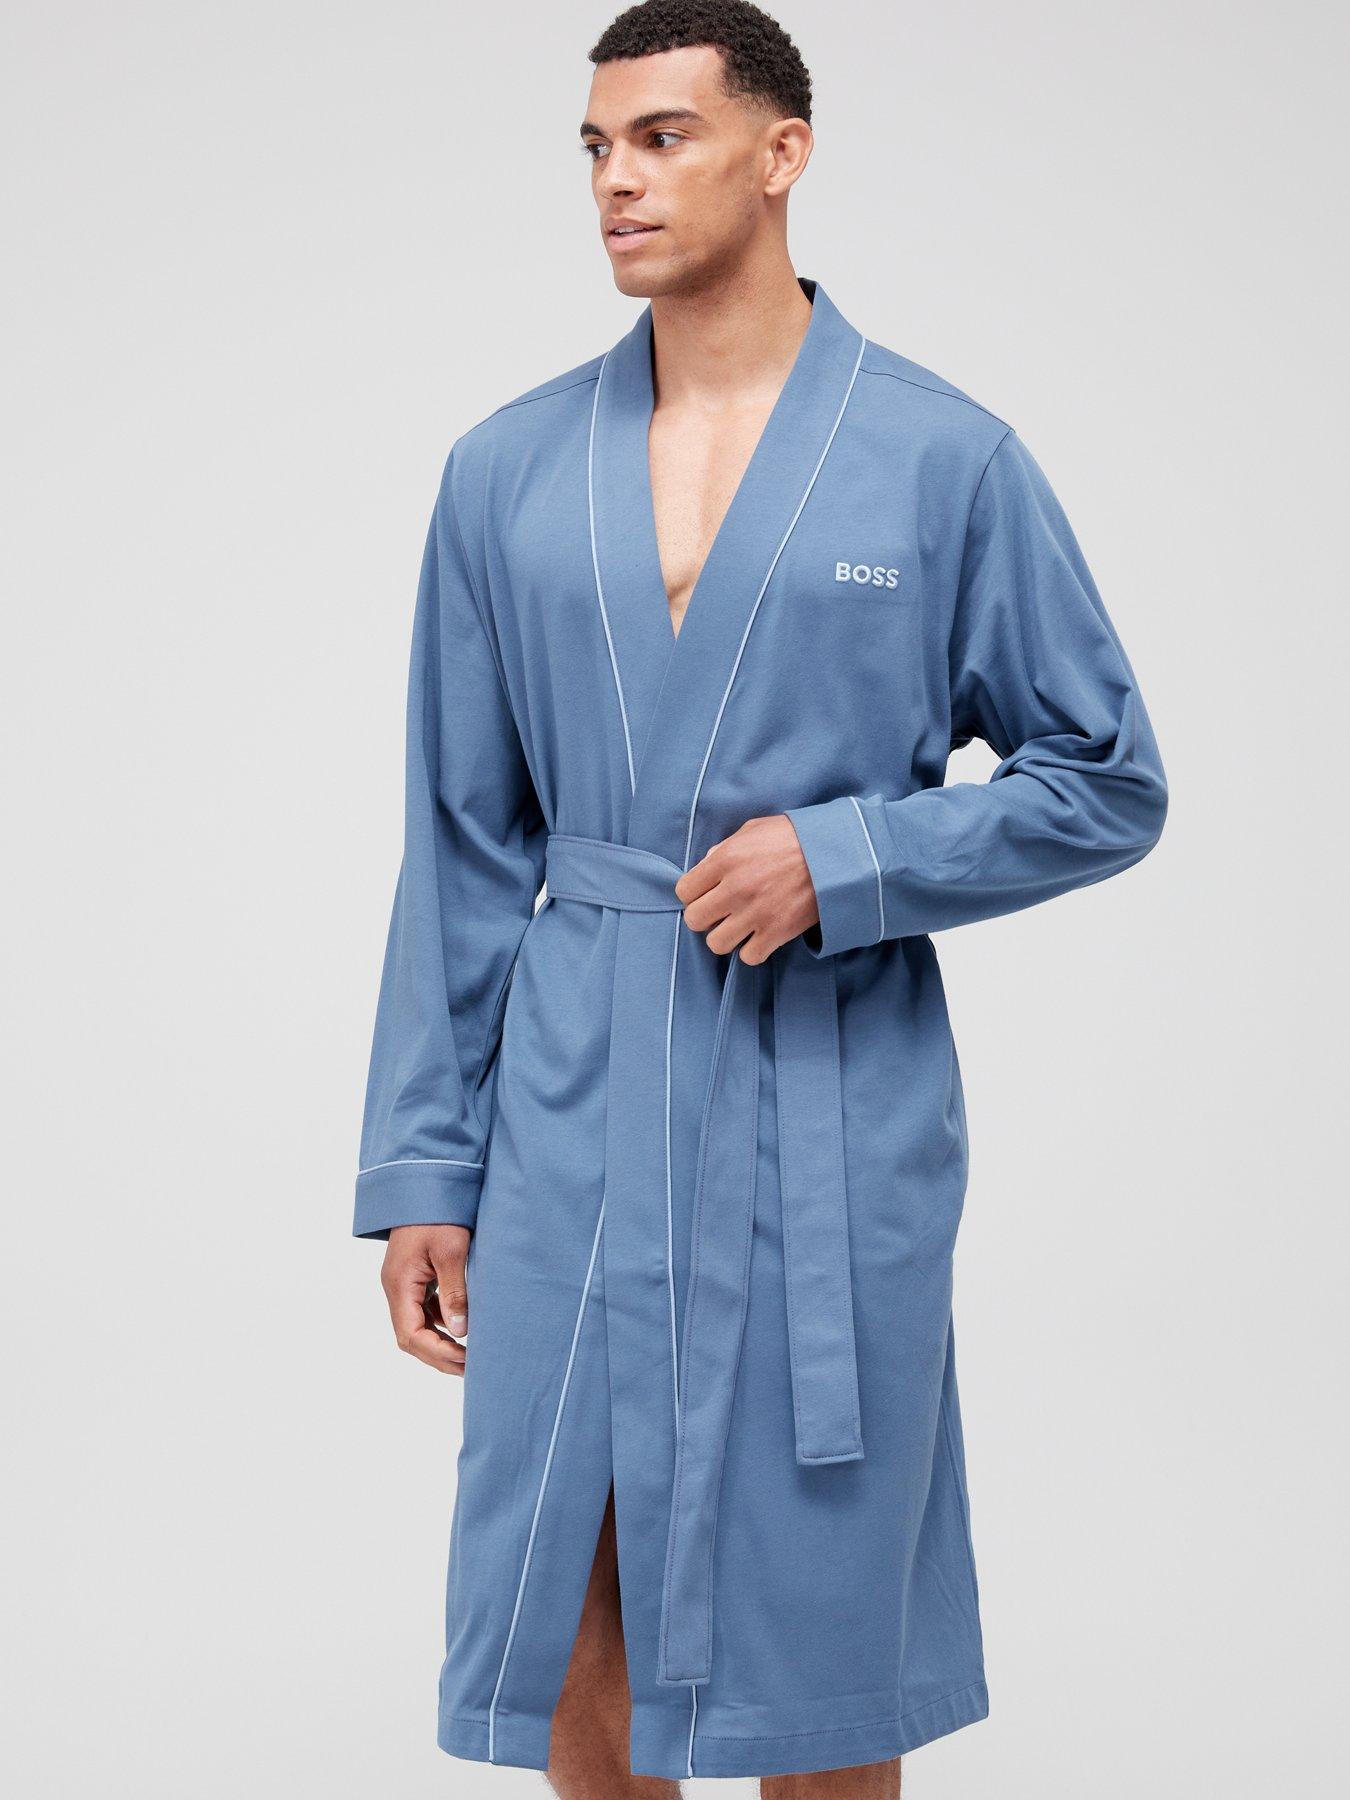 YOUTHUP Men's Dressing Gowns Smooth Sleepwear Pajamas Robe Bathrobe with Belt and Pockets 